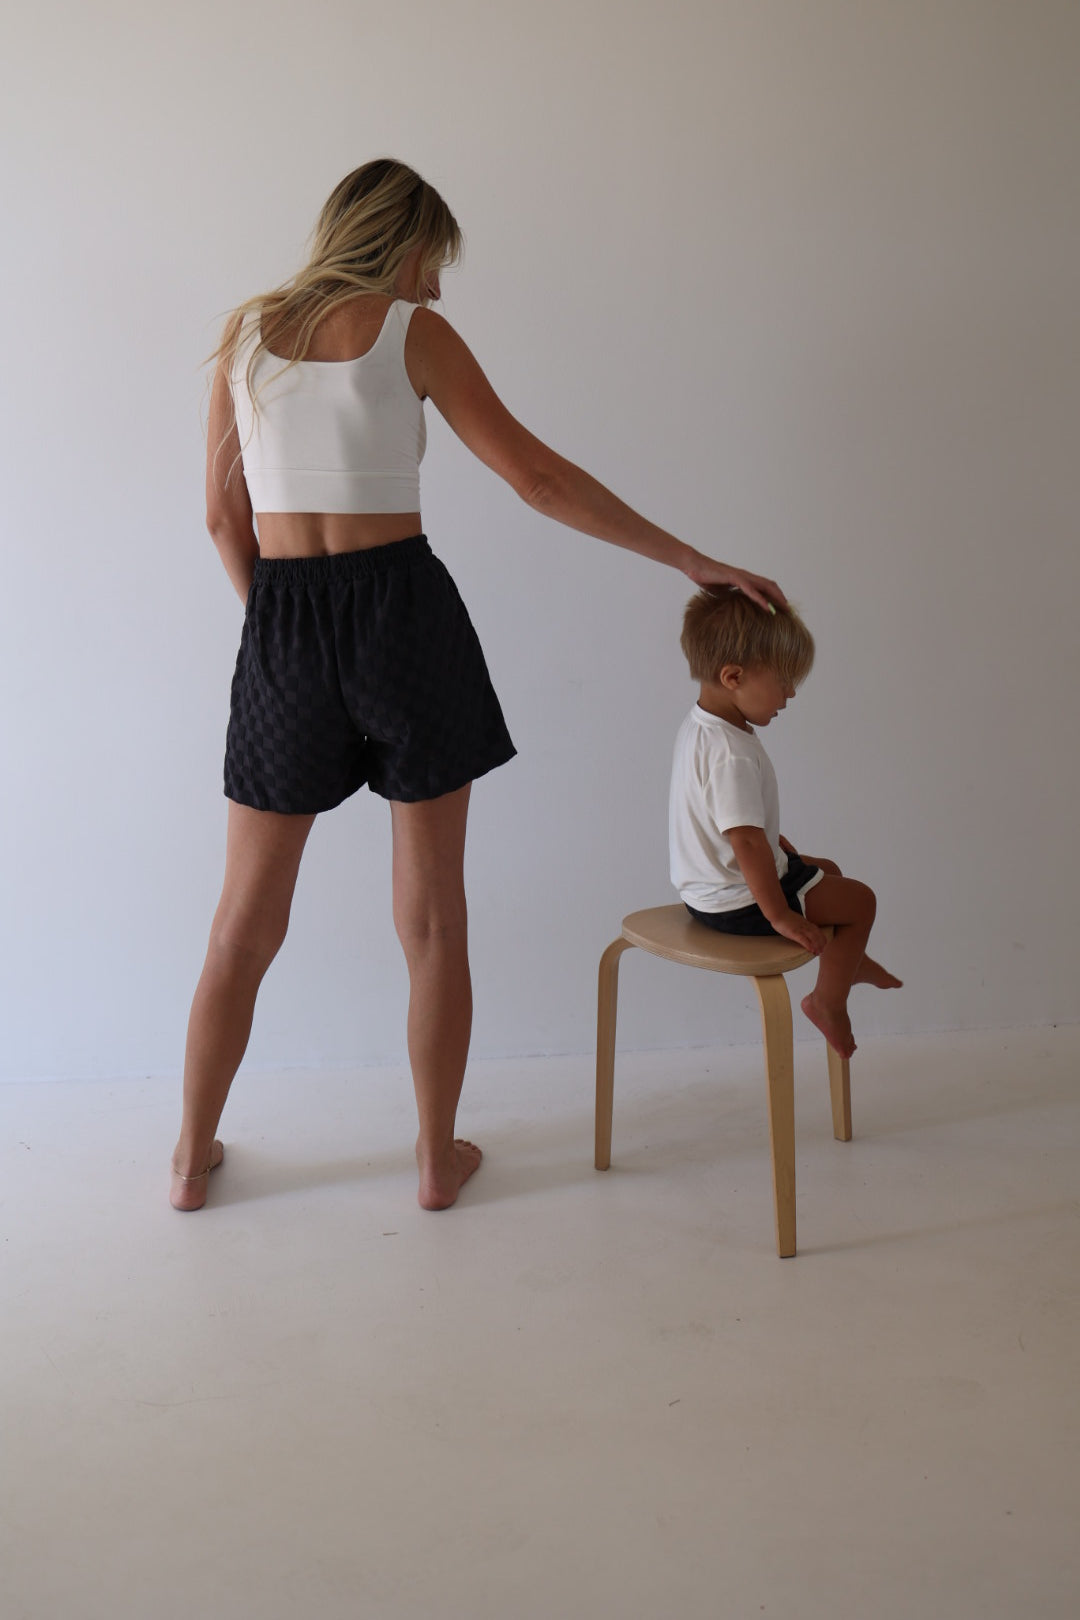 Children's Terry Cloth Shorts | Charcoal Checkerboard